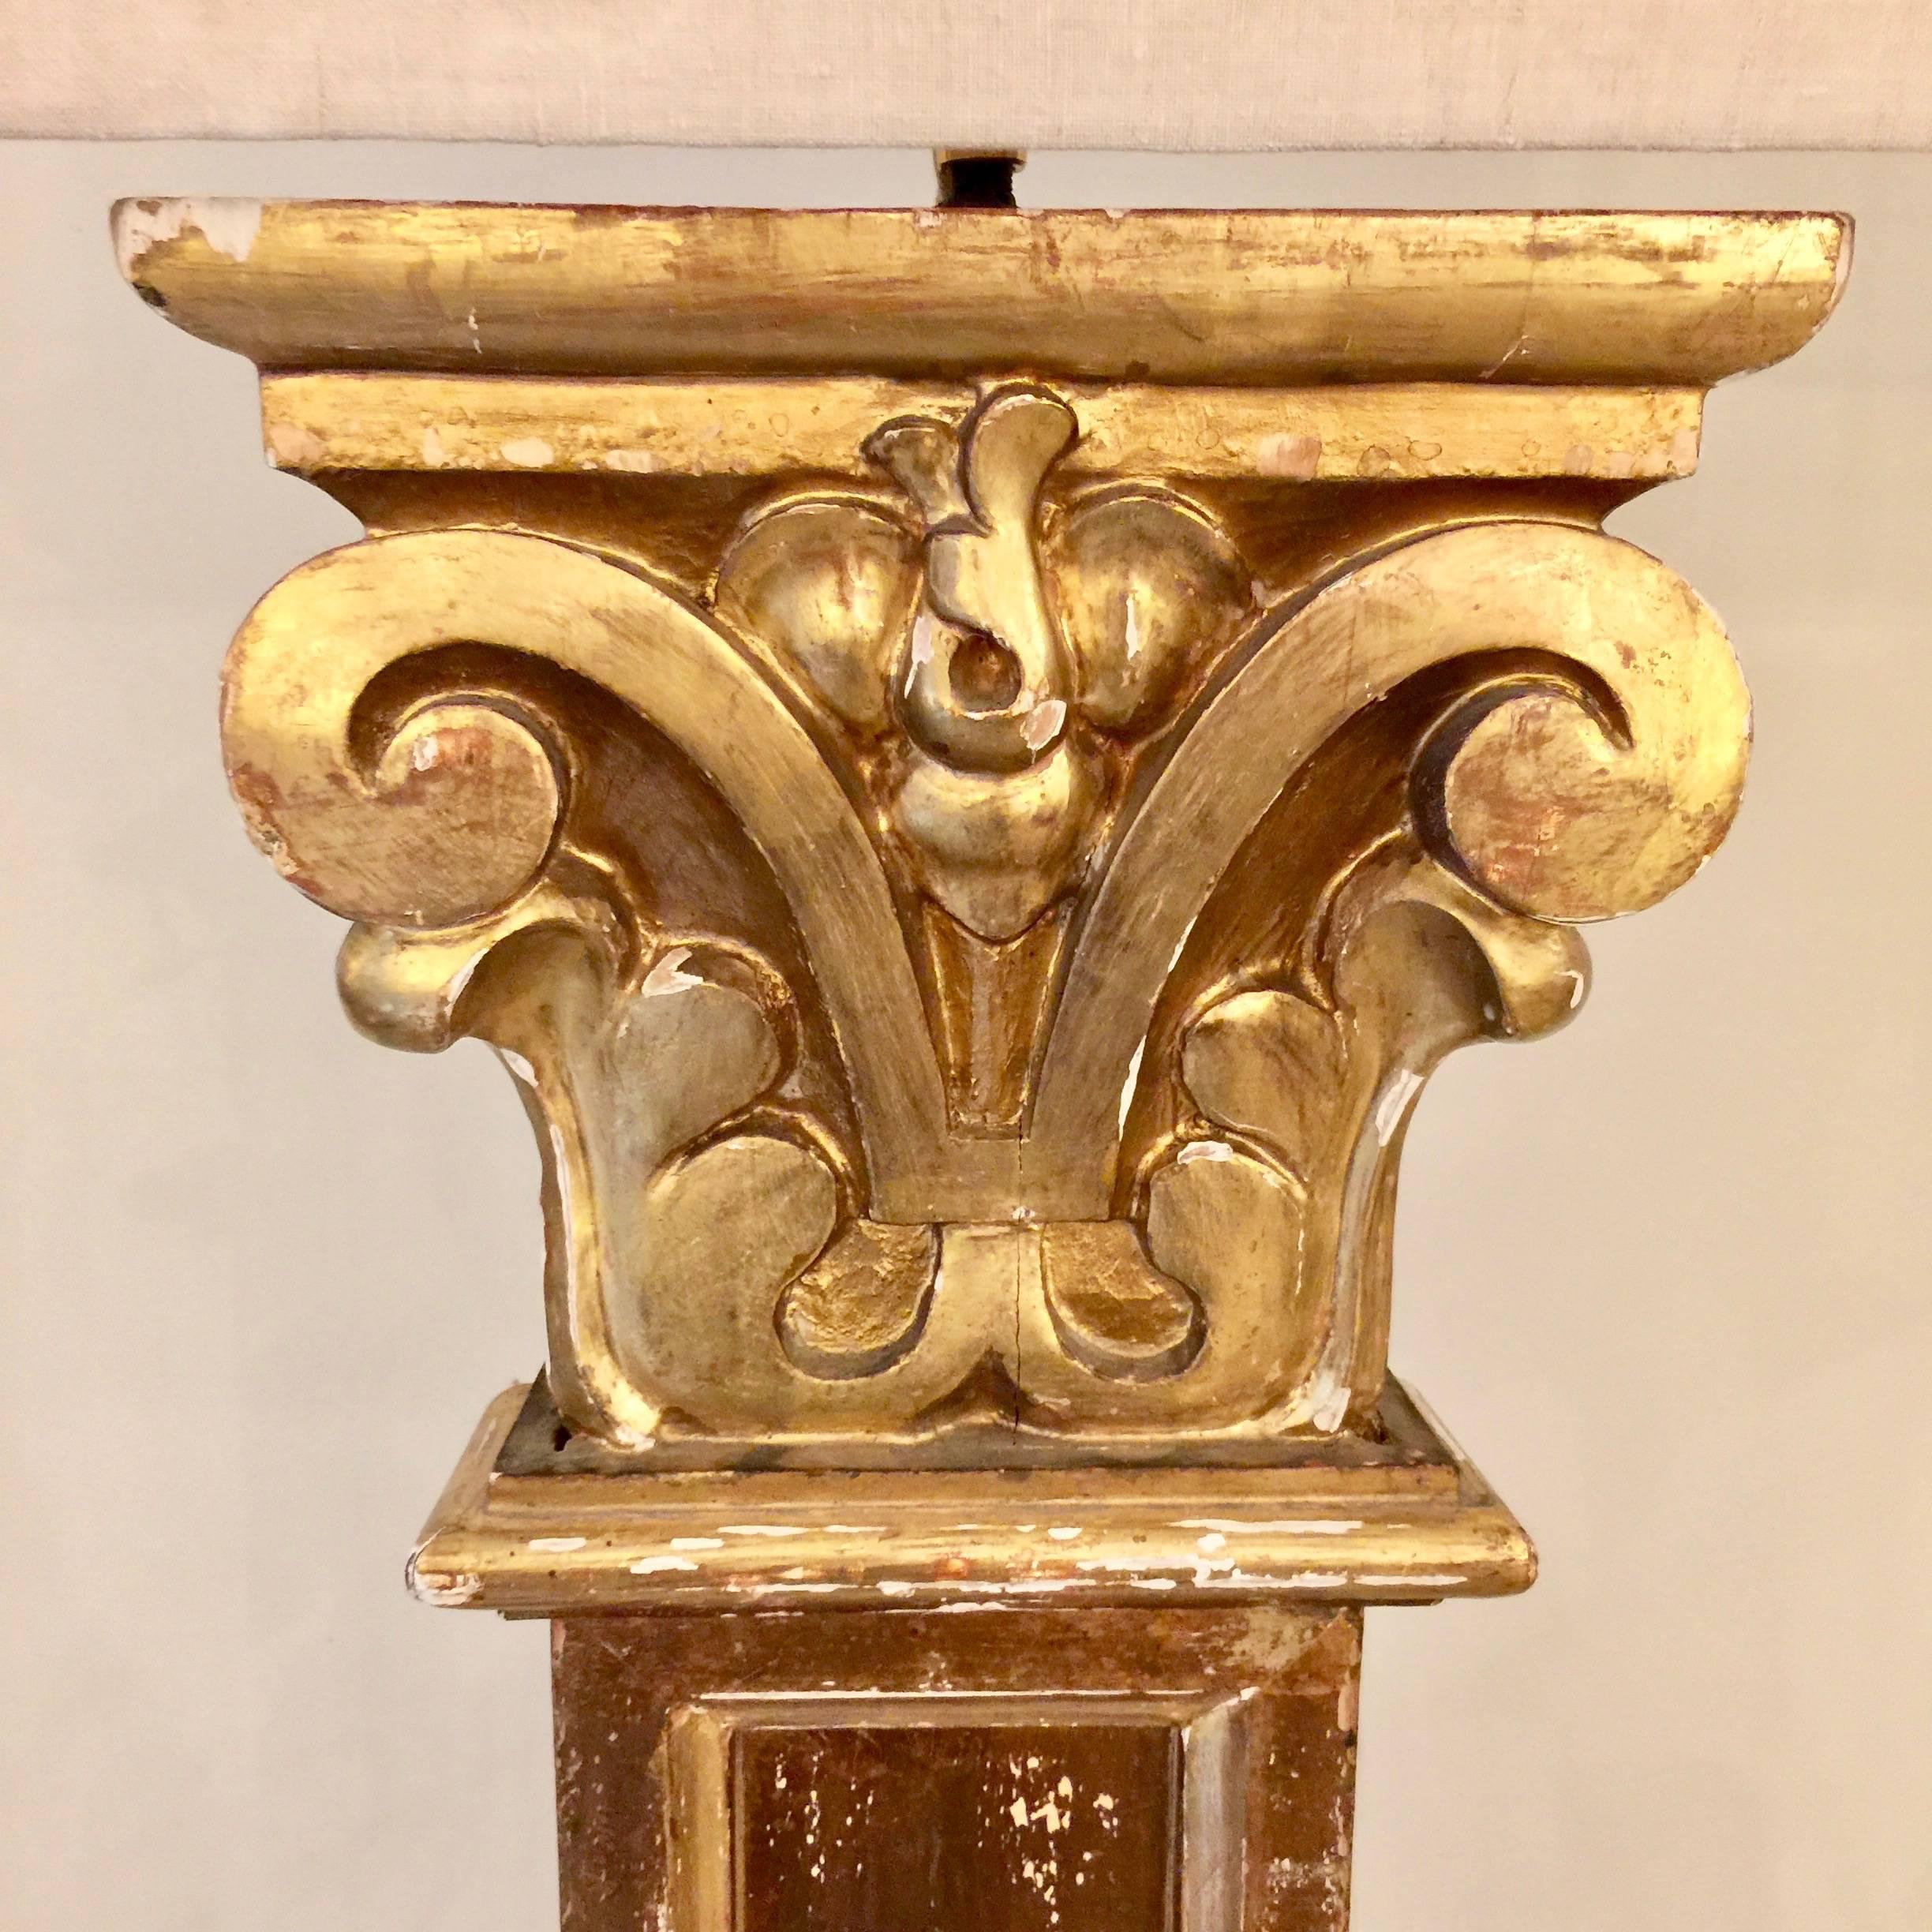 Hand-Carved Pair of 19th century Pilaster Fragment as Floorlamps with Custommade Linen Shade